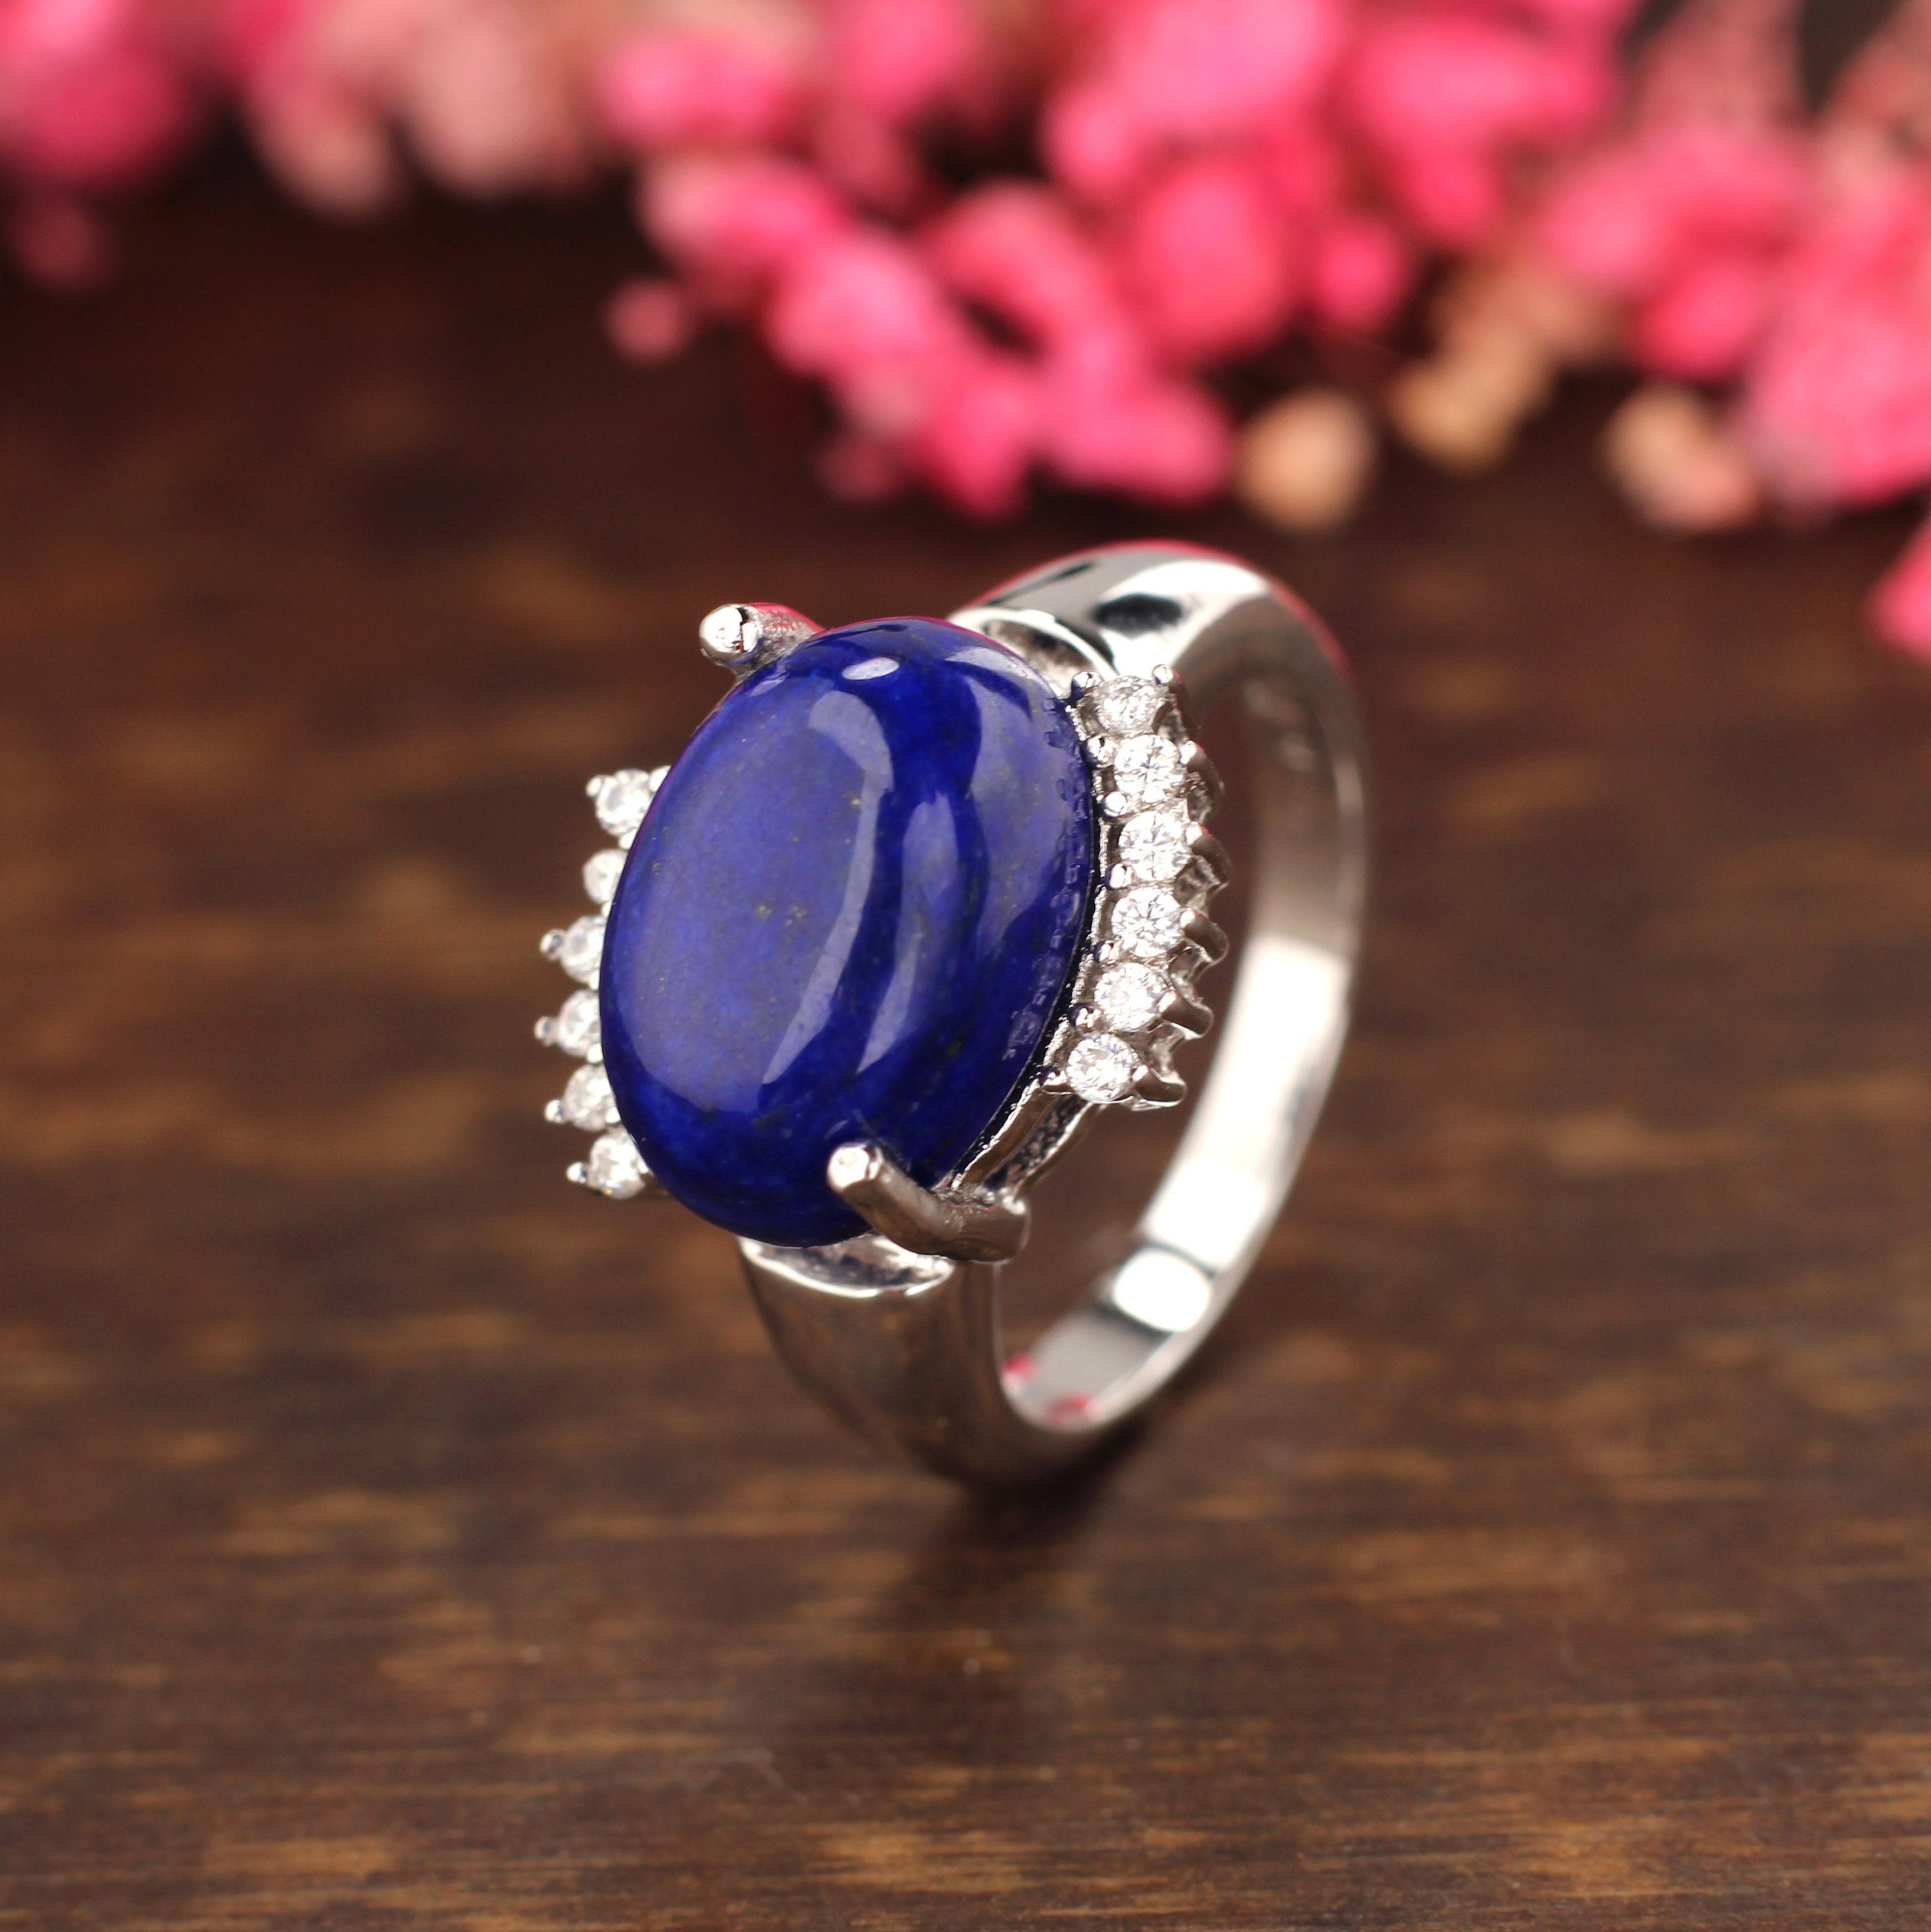 Can I wear a lapis legule stone in a gold ring? - Quora